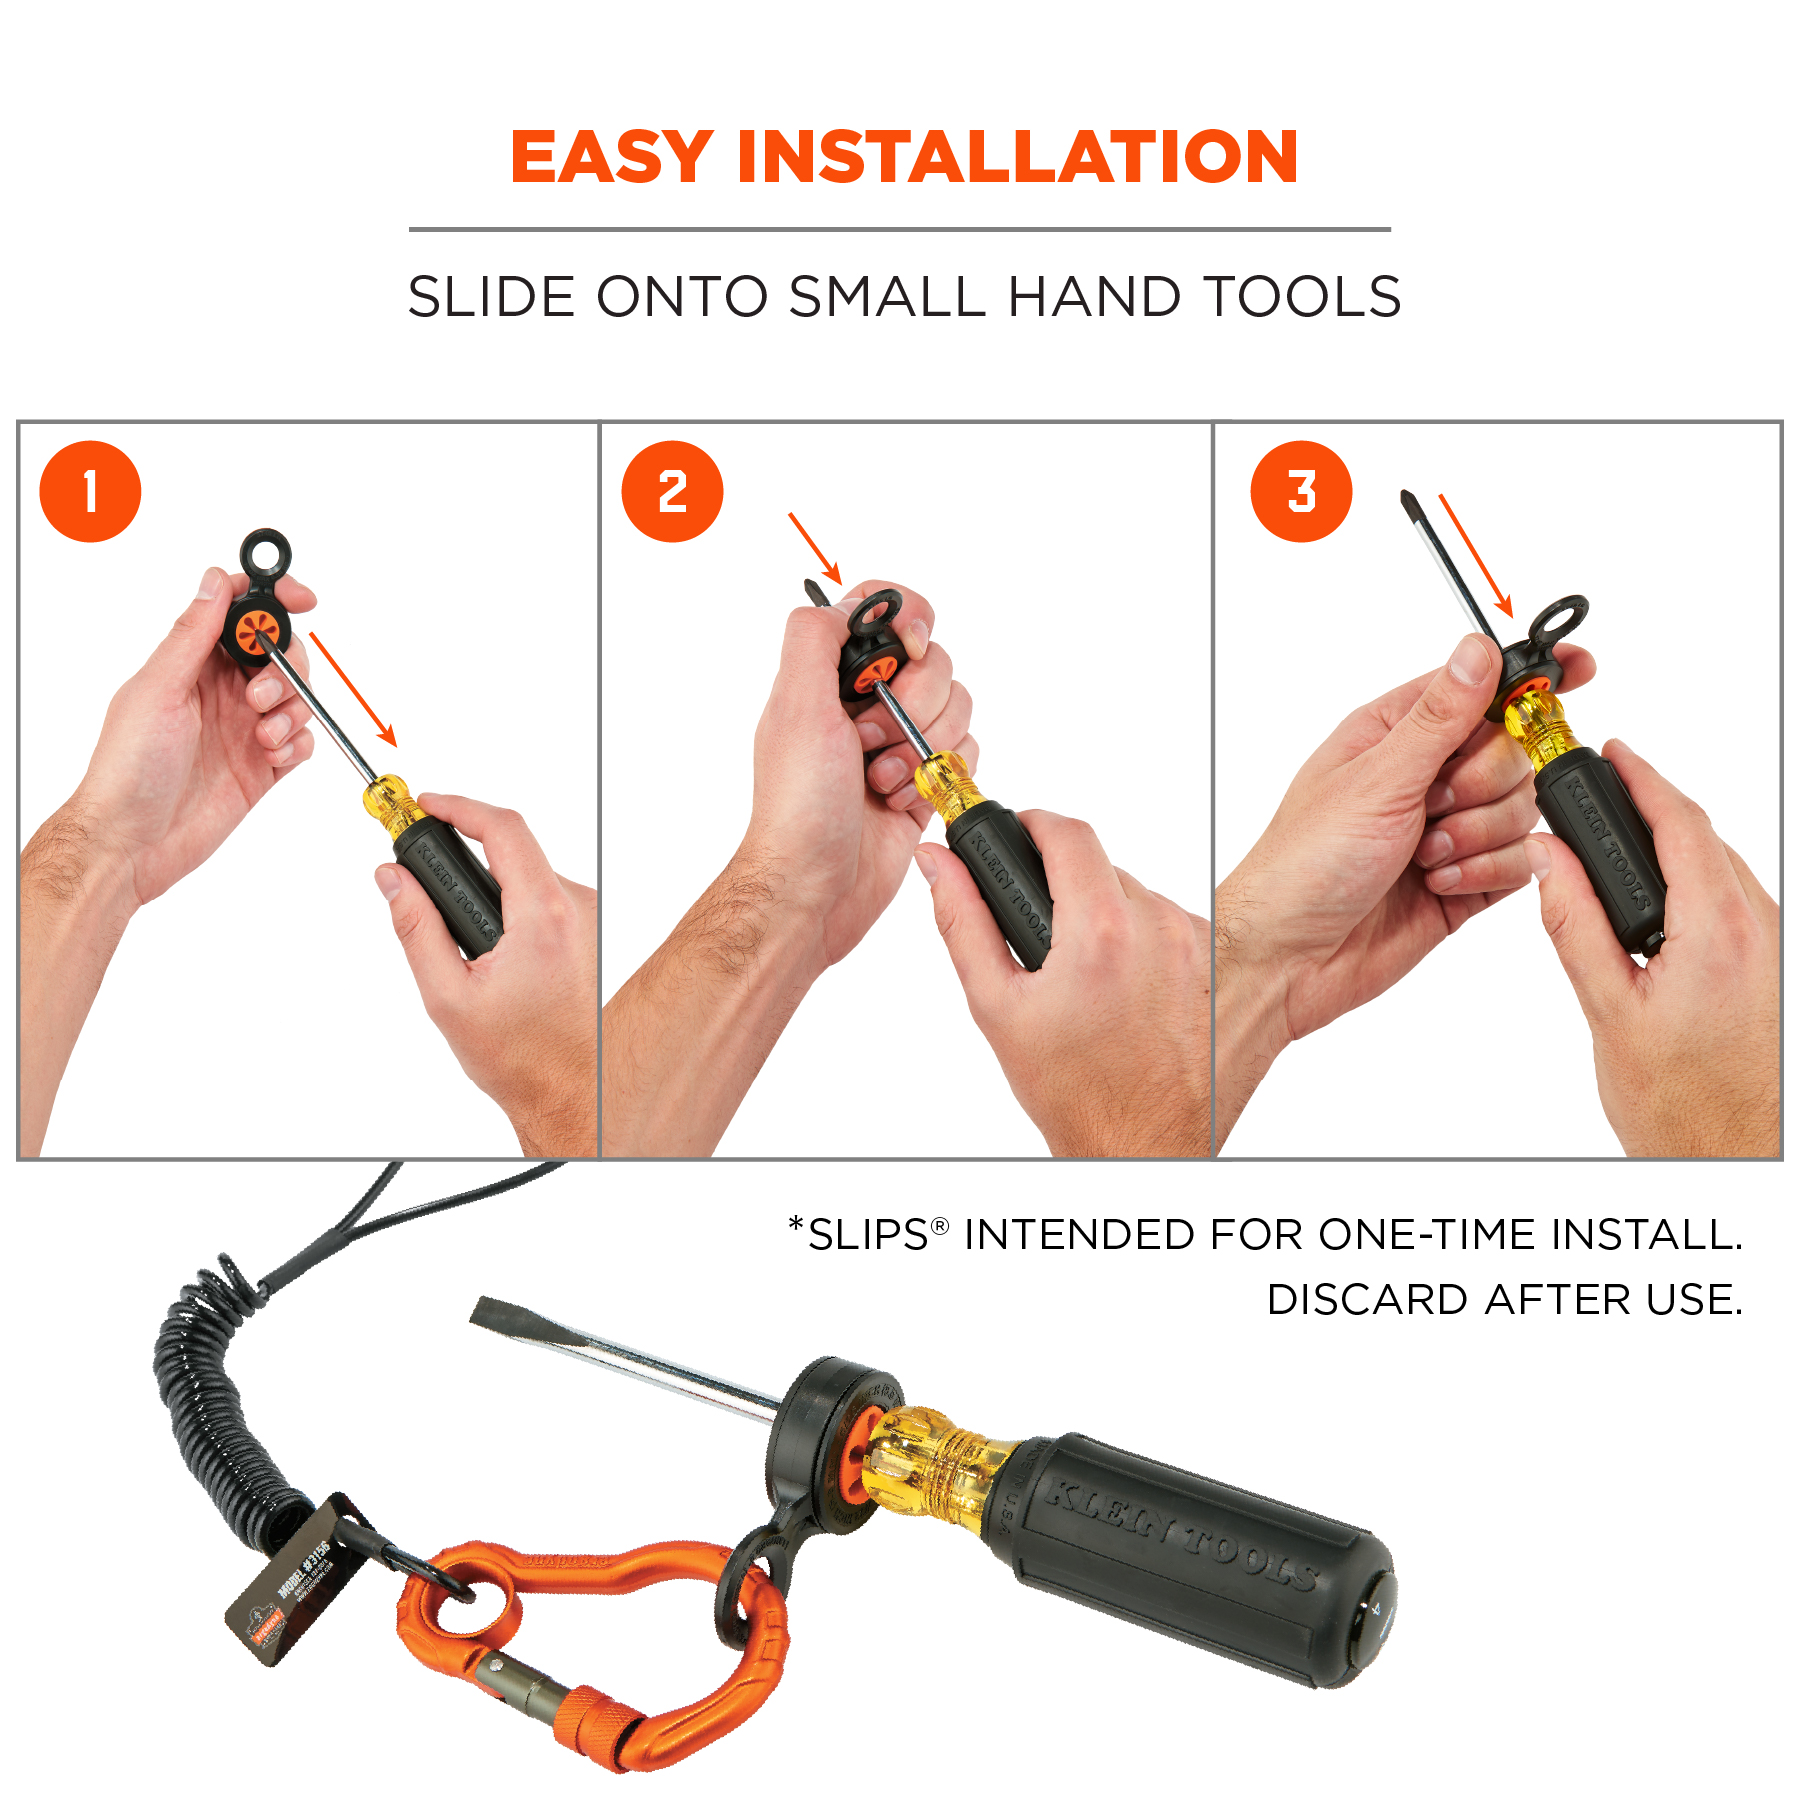 Helpful Tools for a One-Handed Person